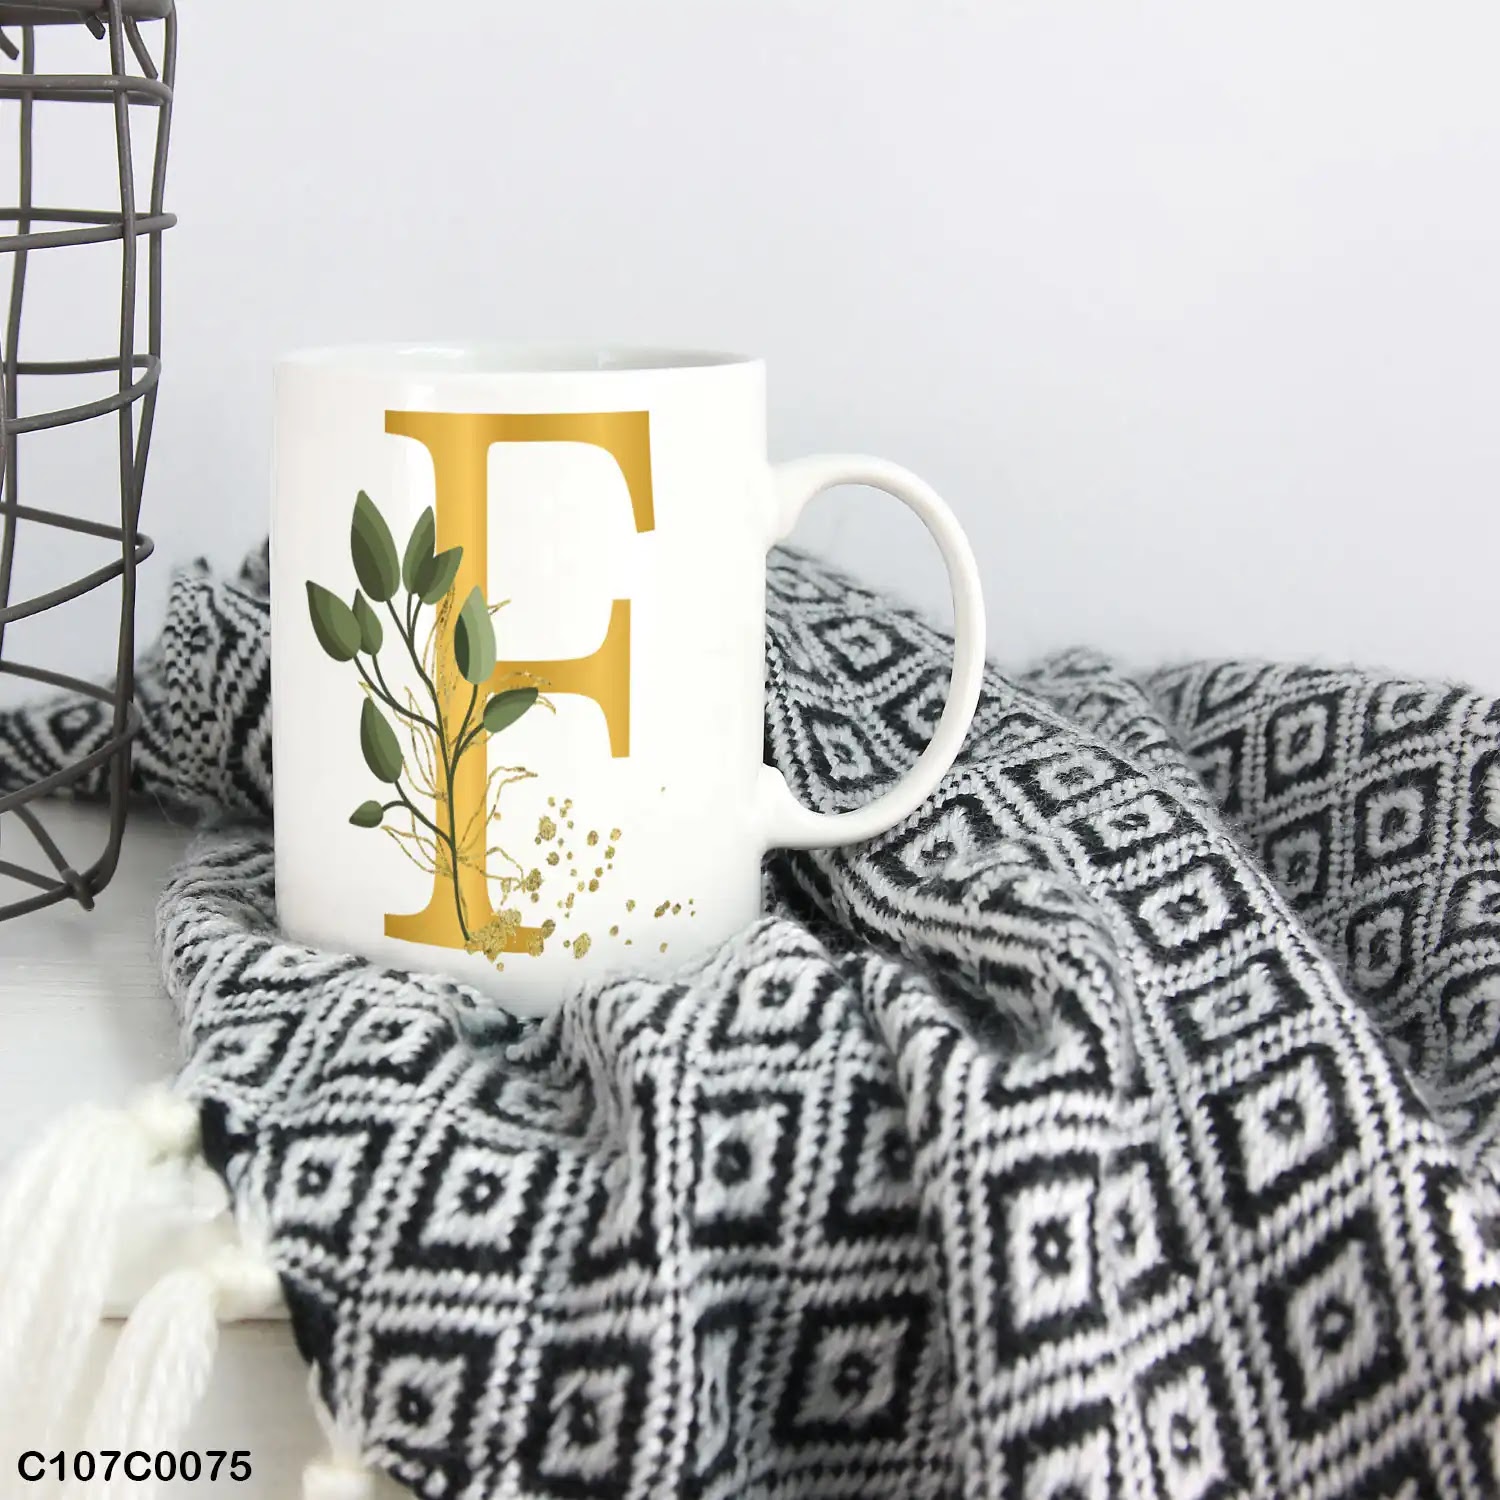 A white mug (cup) printed with gold Letter "F" and small green branch